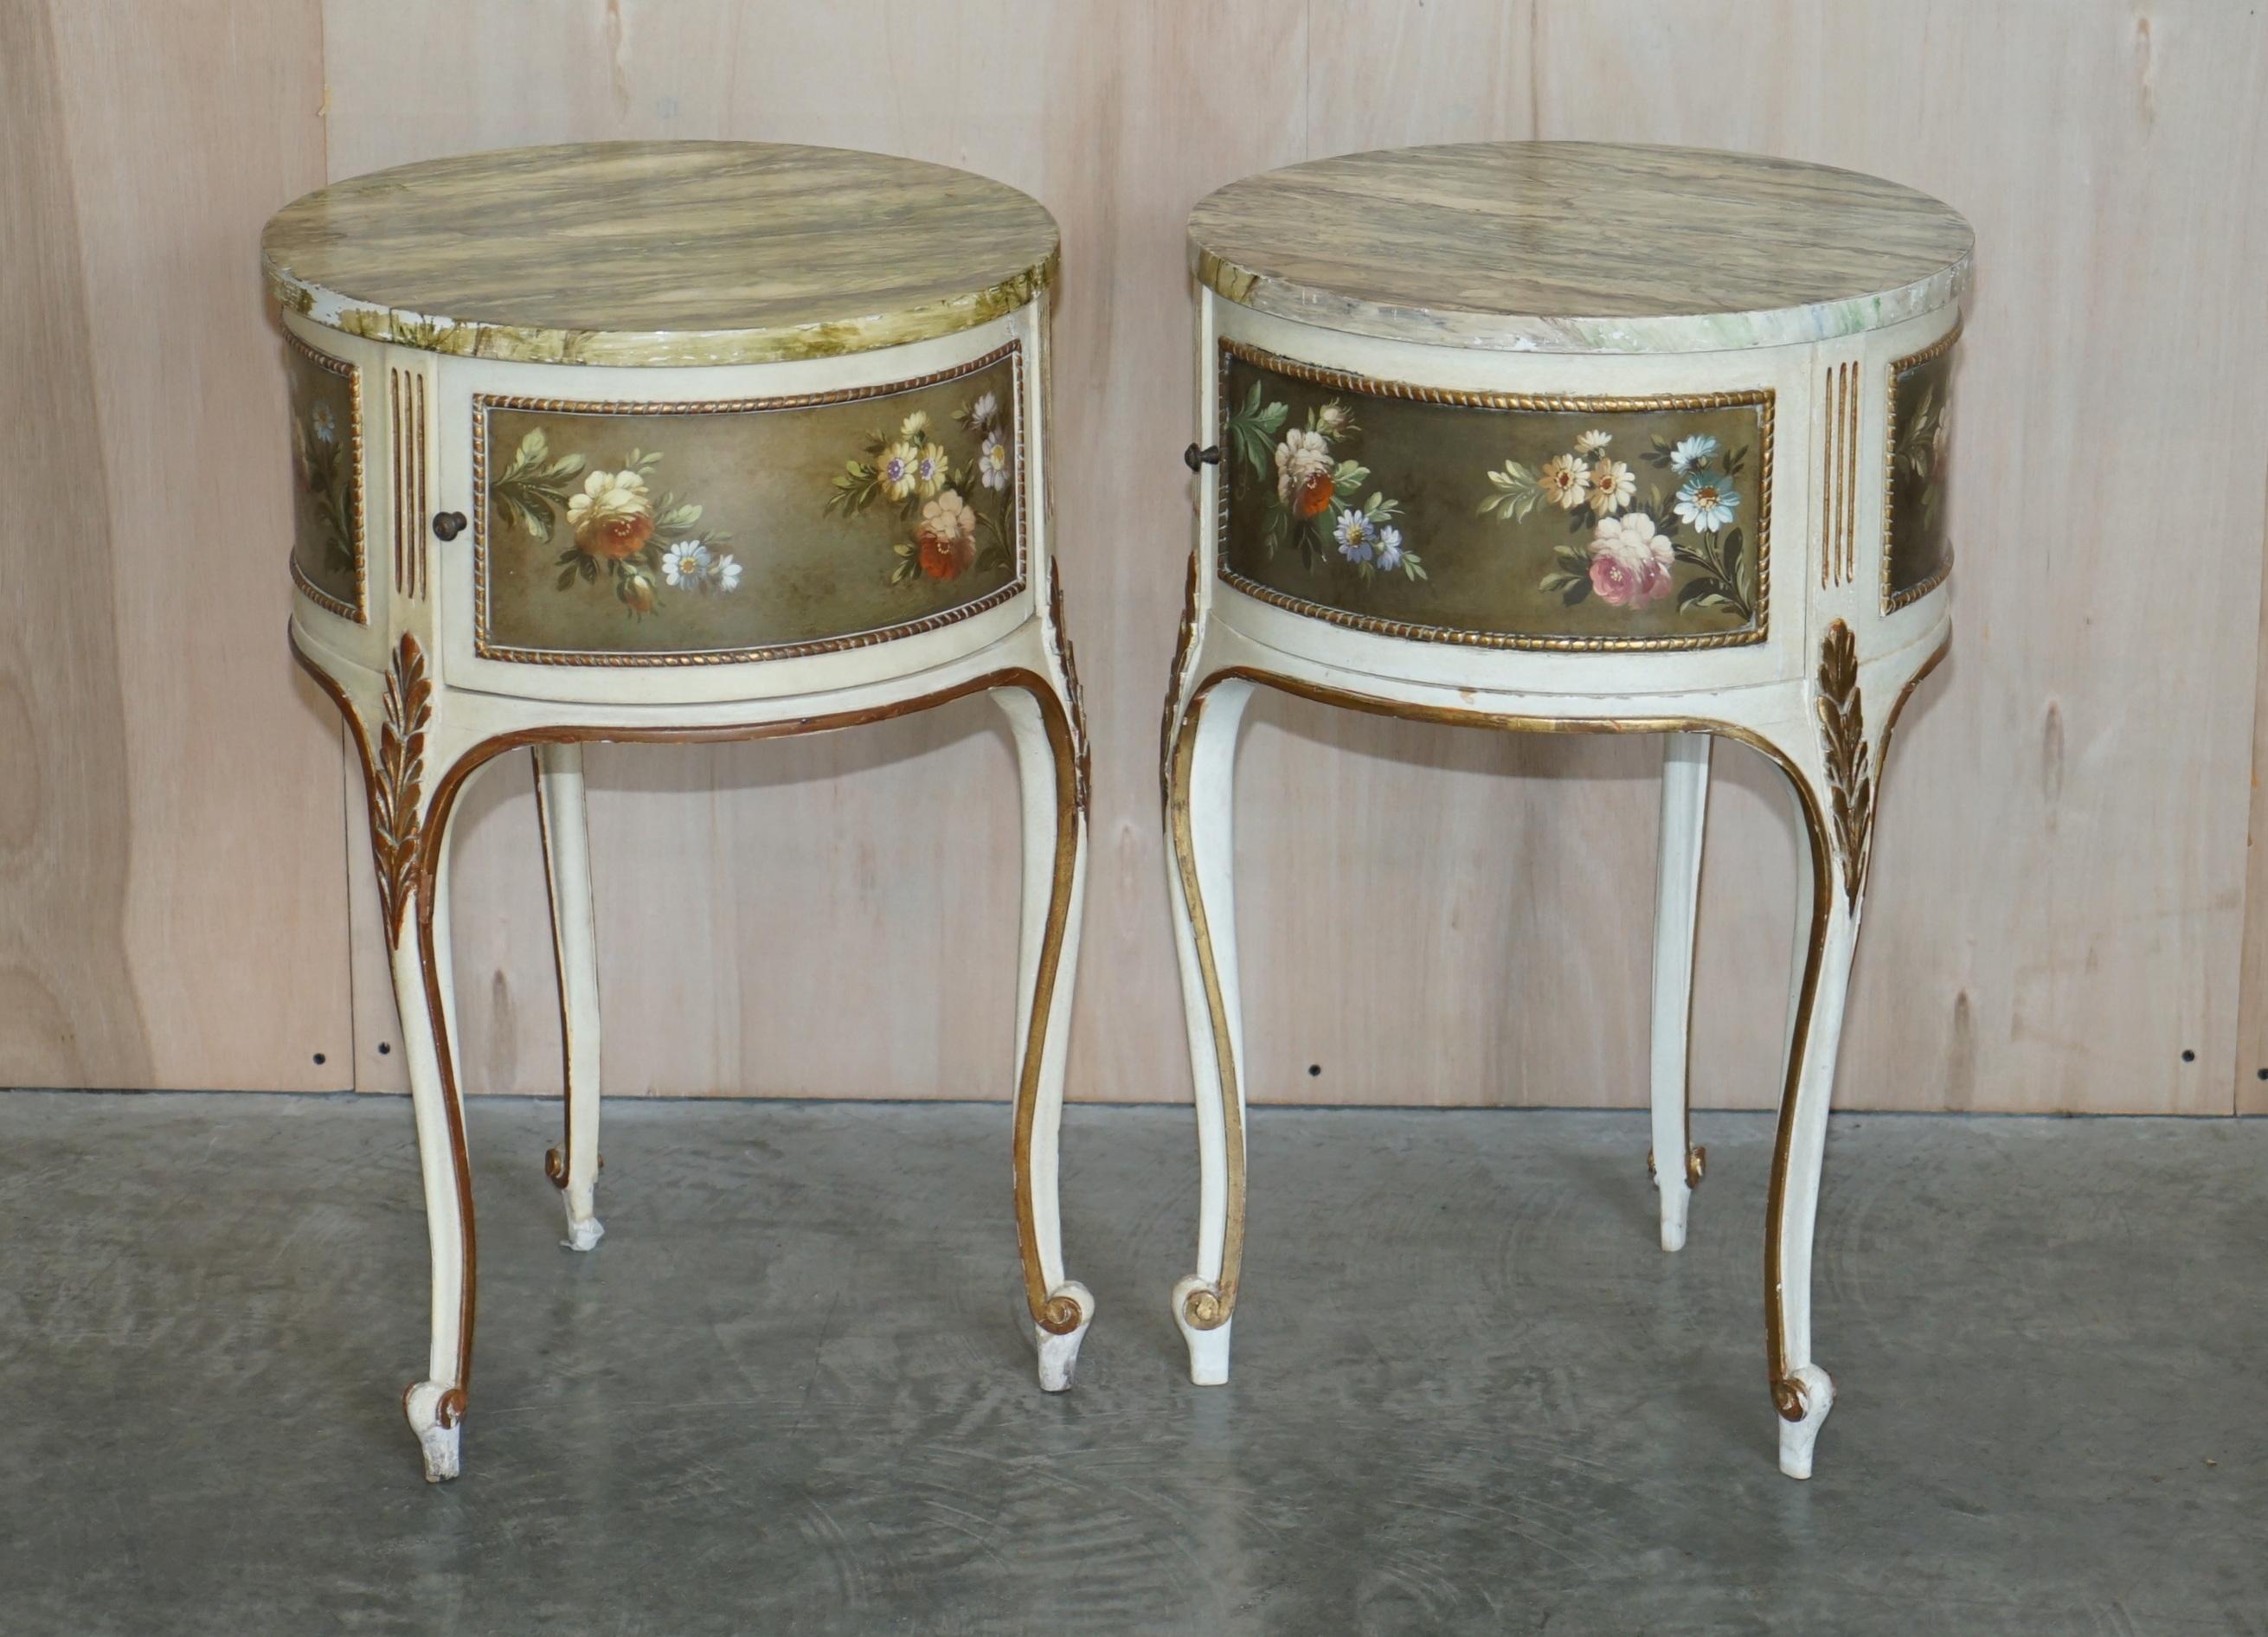 We are delighted to offer for sale this stunning pair of antique Louis XVI style floral side end tables.

A good looking well made and decorative pair, they are just about as French Country House fine as can be, each table has a marbled top which